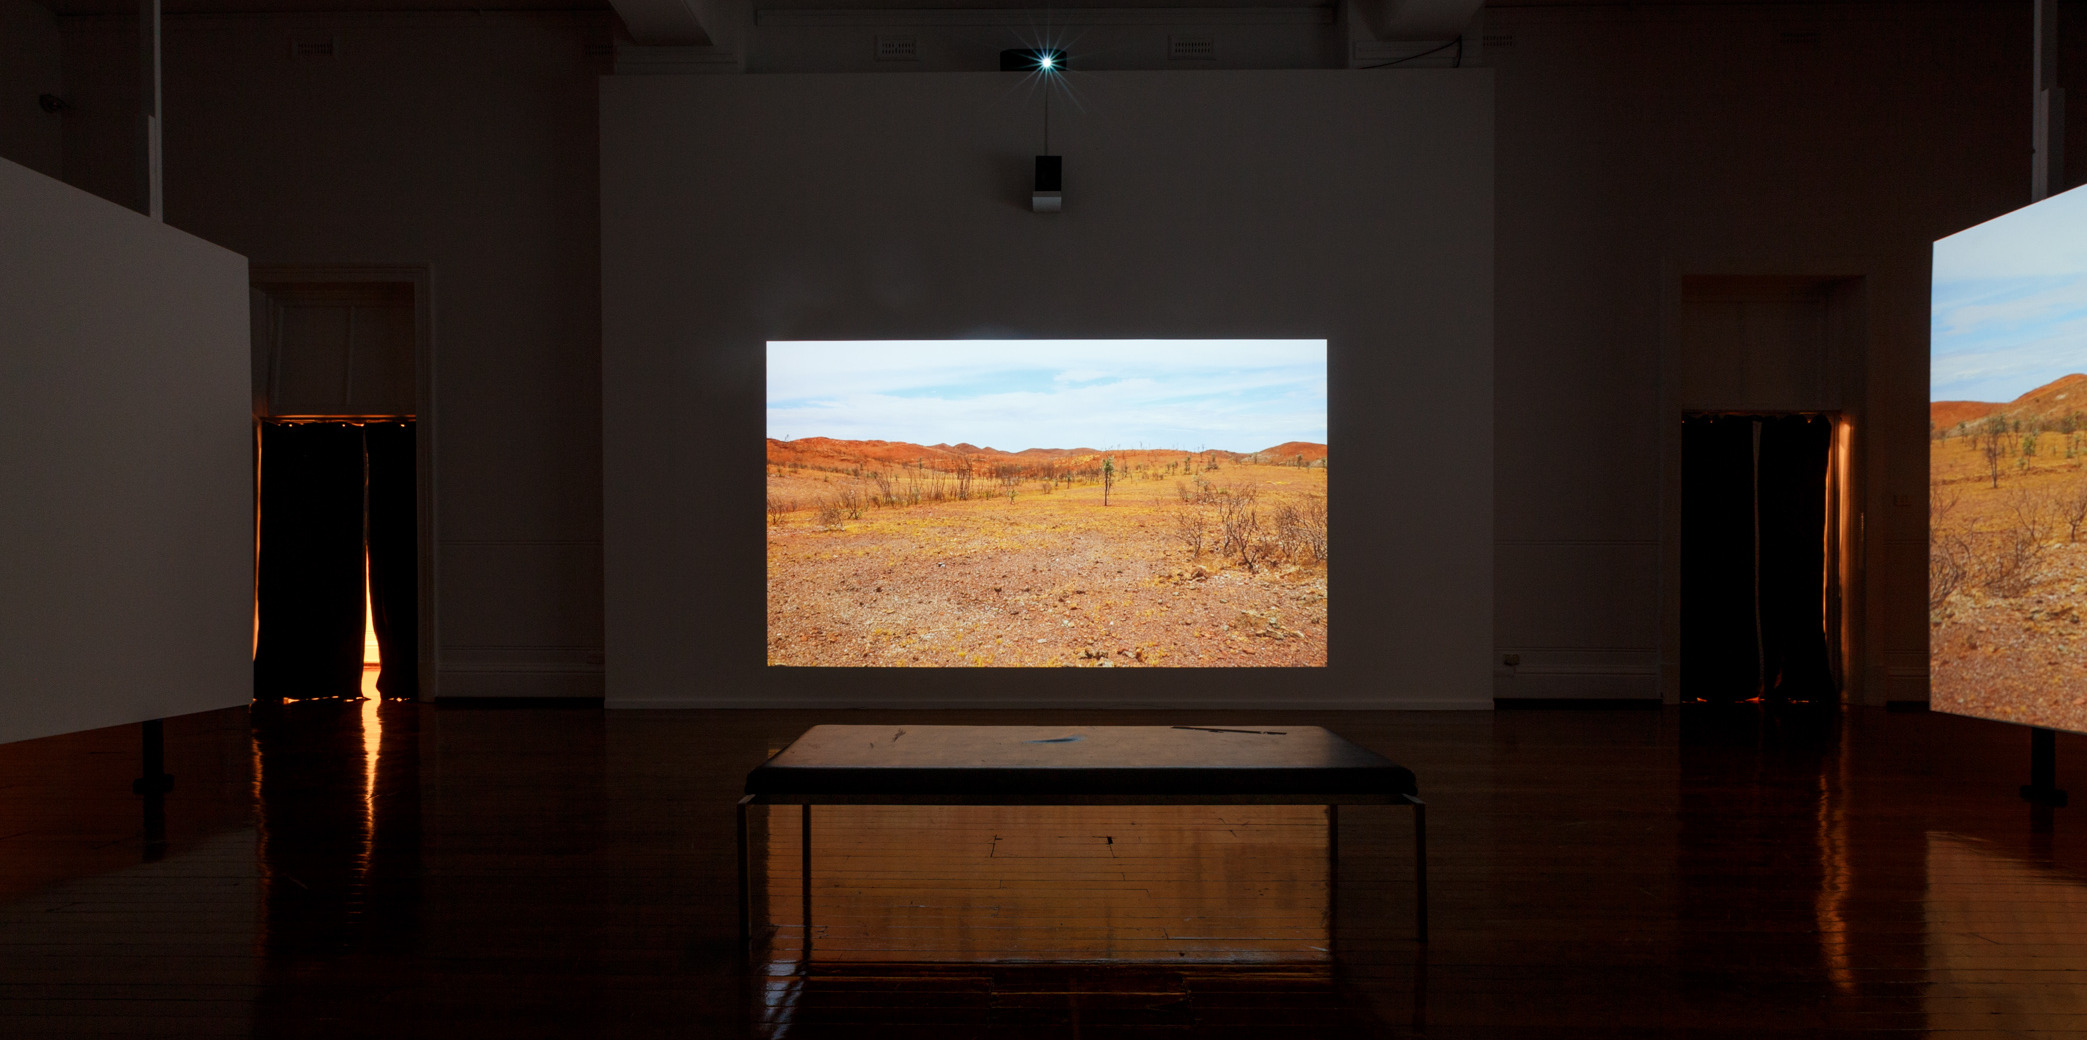 Melbourne-based artist Claire Robertson’s cinematic installation depicts an uninhabited temporary mining camp in the Pilbara, showing scenes of empty industrial villages set against the Australian outback. The installation is accompanied by a haunting original soundtrack by composer Tilman Robinson.